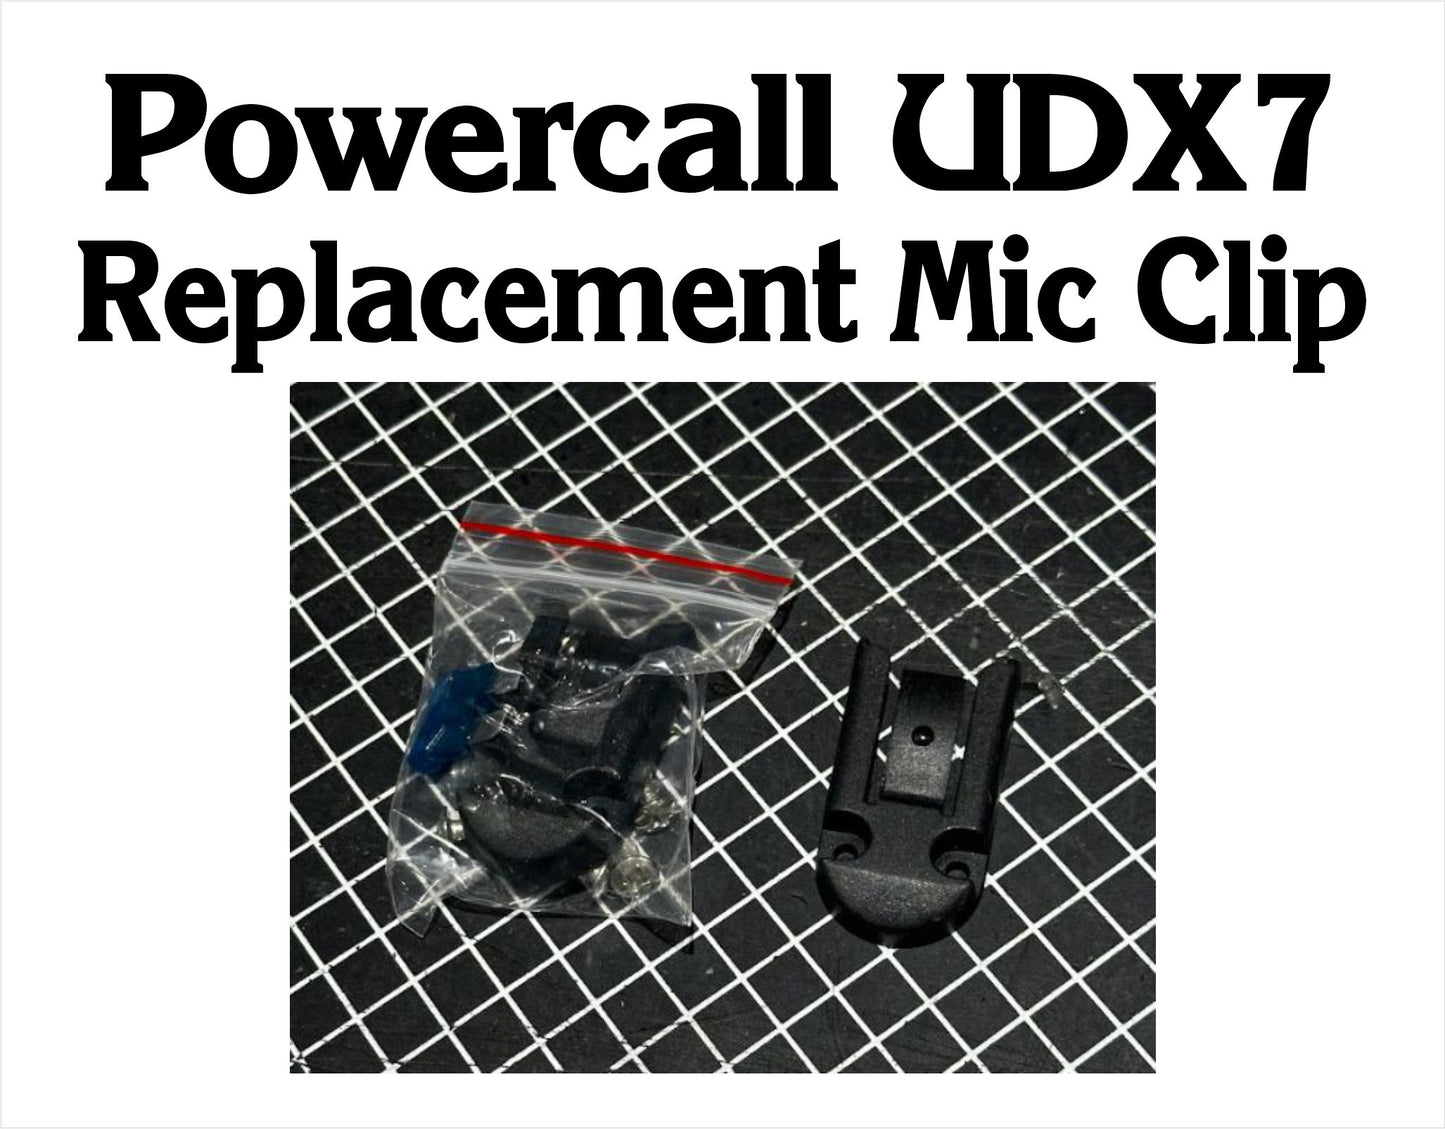 Powercall UDX7 Replacement Mic Clip Packet